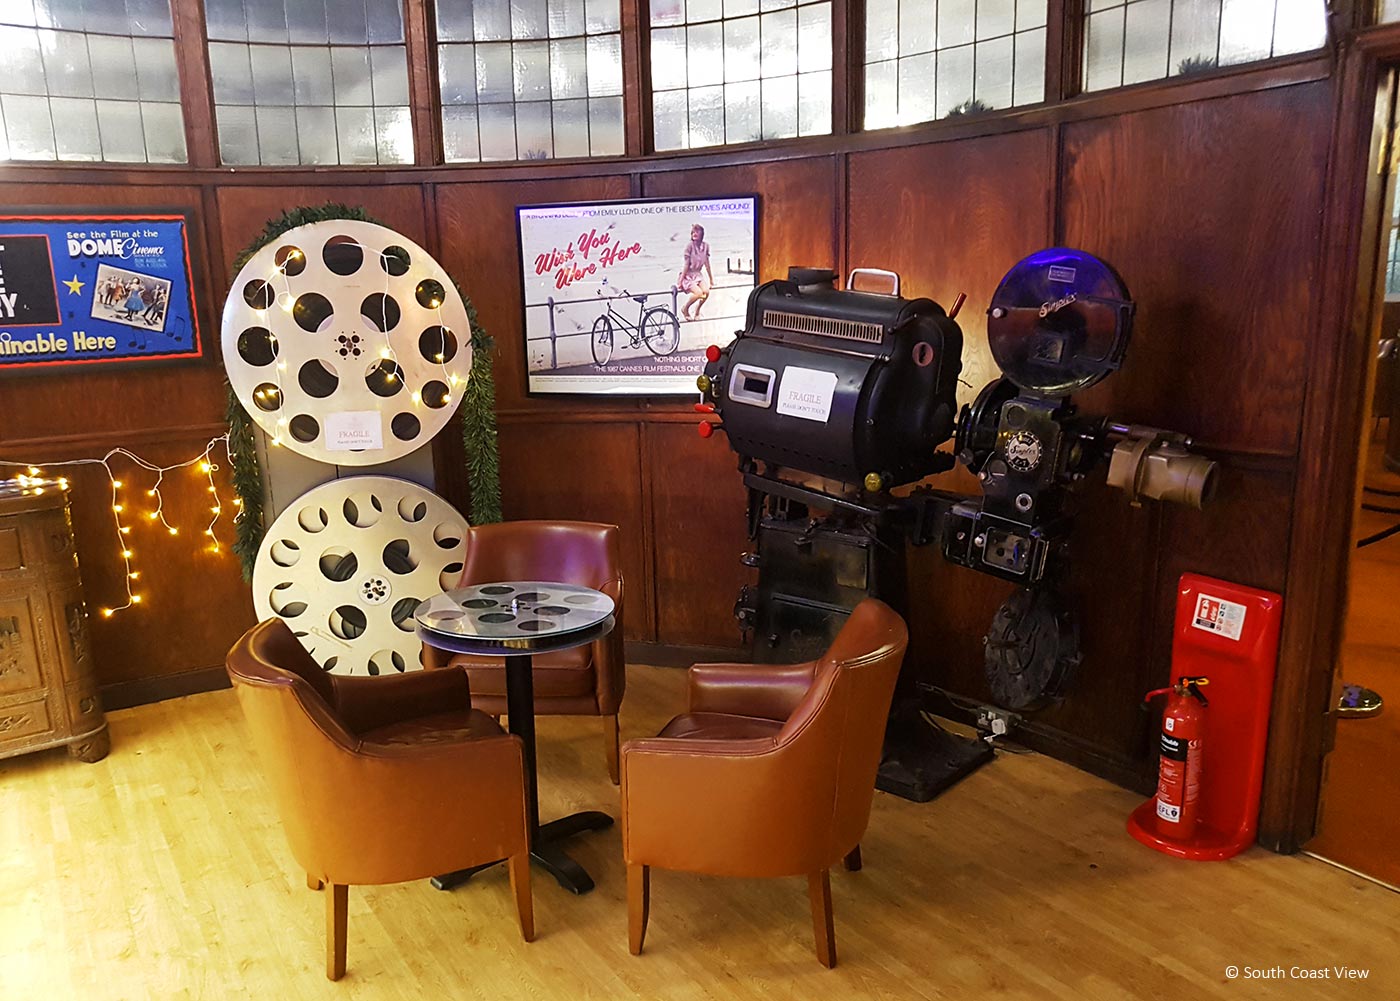 Old film projector - Dome Cinema